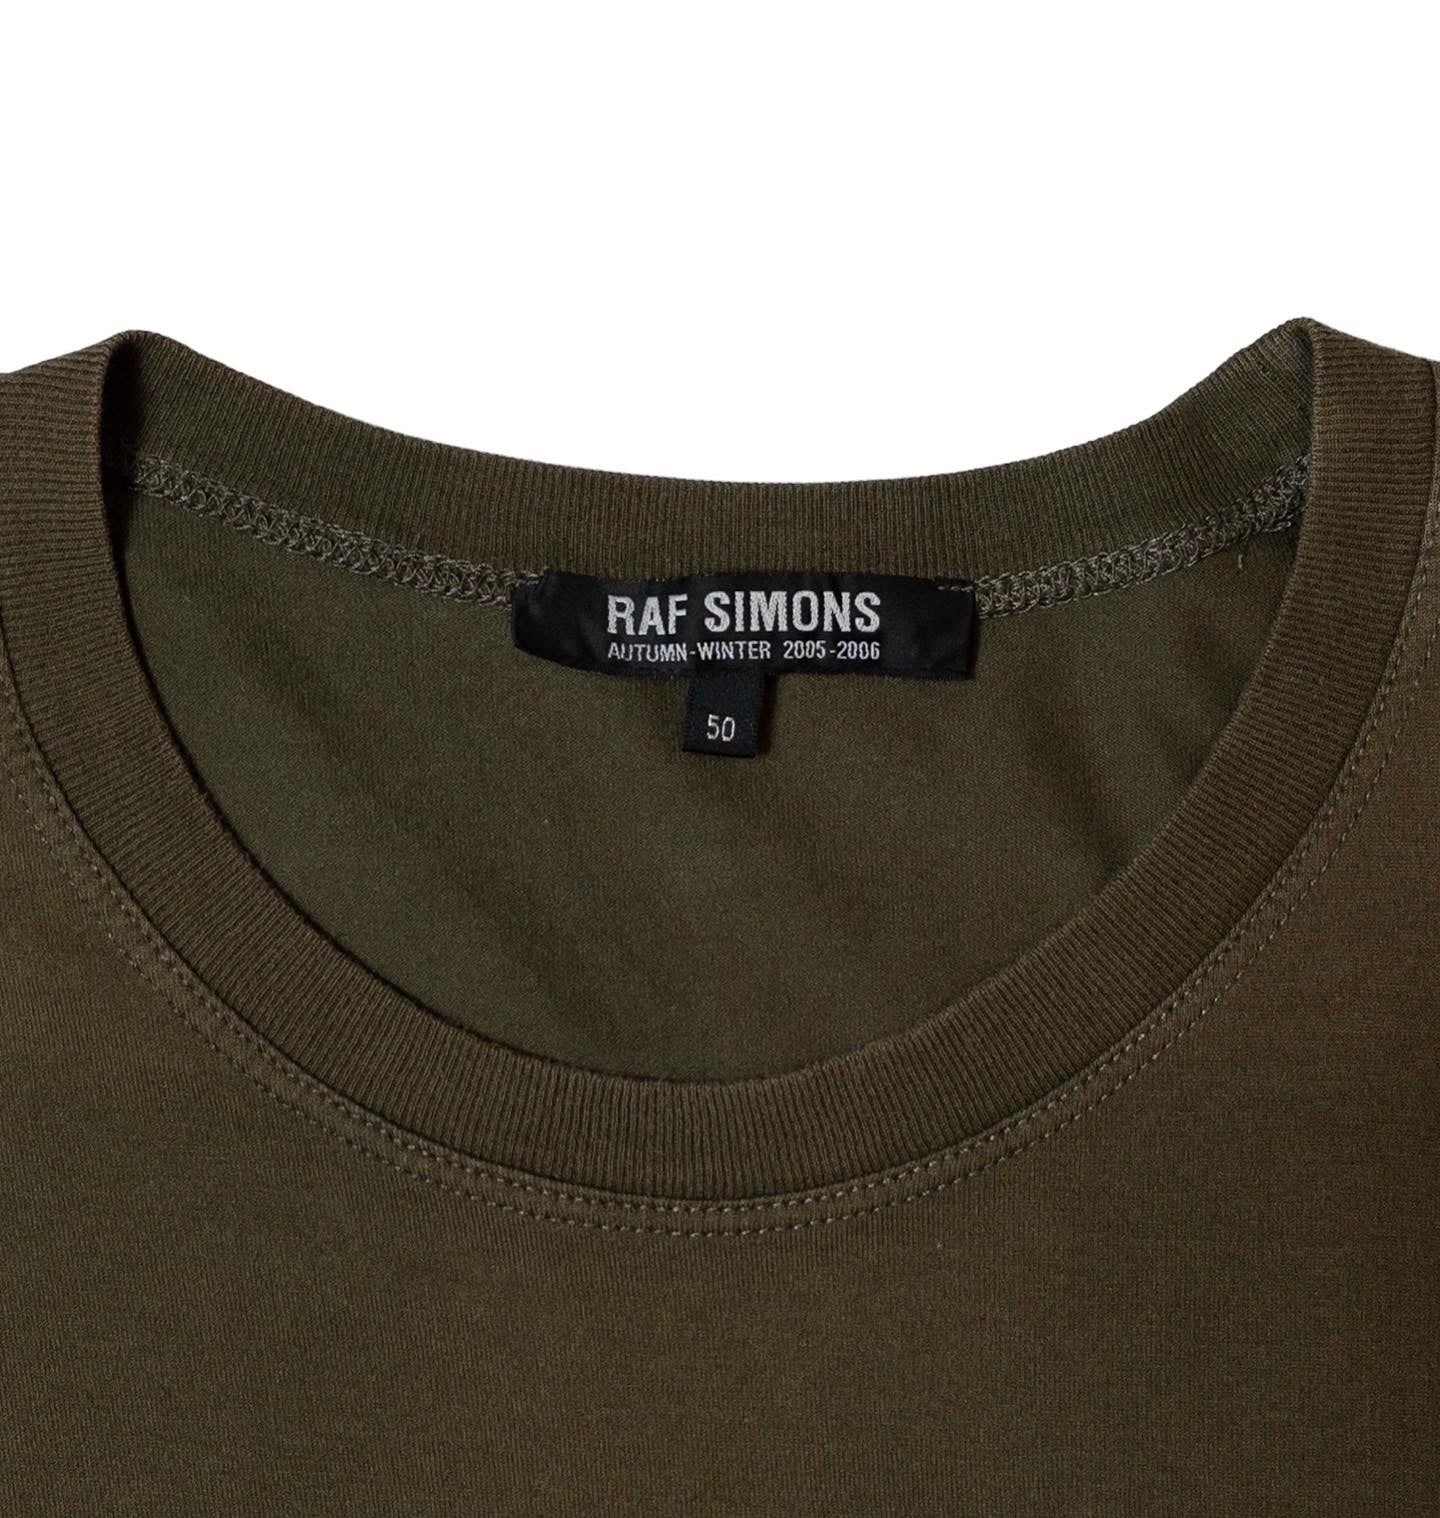 Raf Simons AW05 'History of Our World' My Twin Ghost Tee